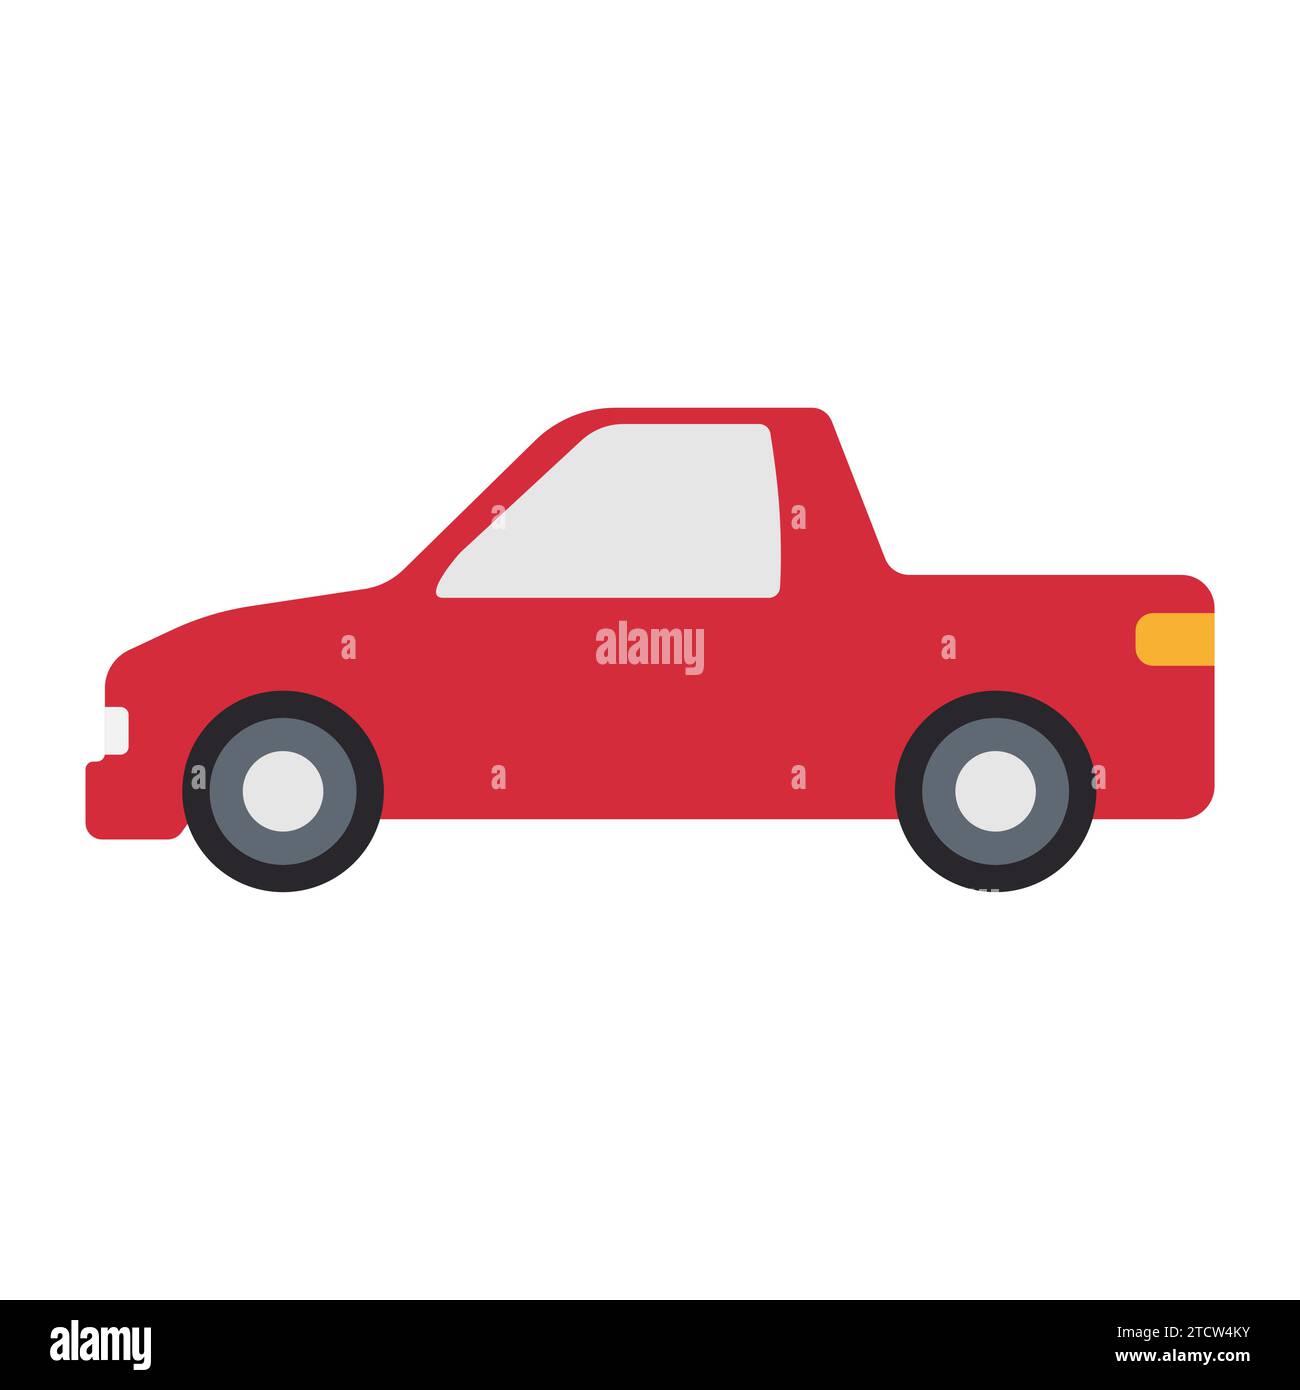 Red pickup side view icon on white background Stock Vector